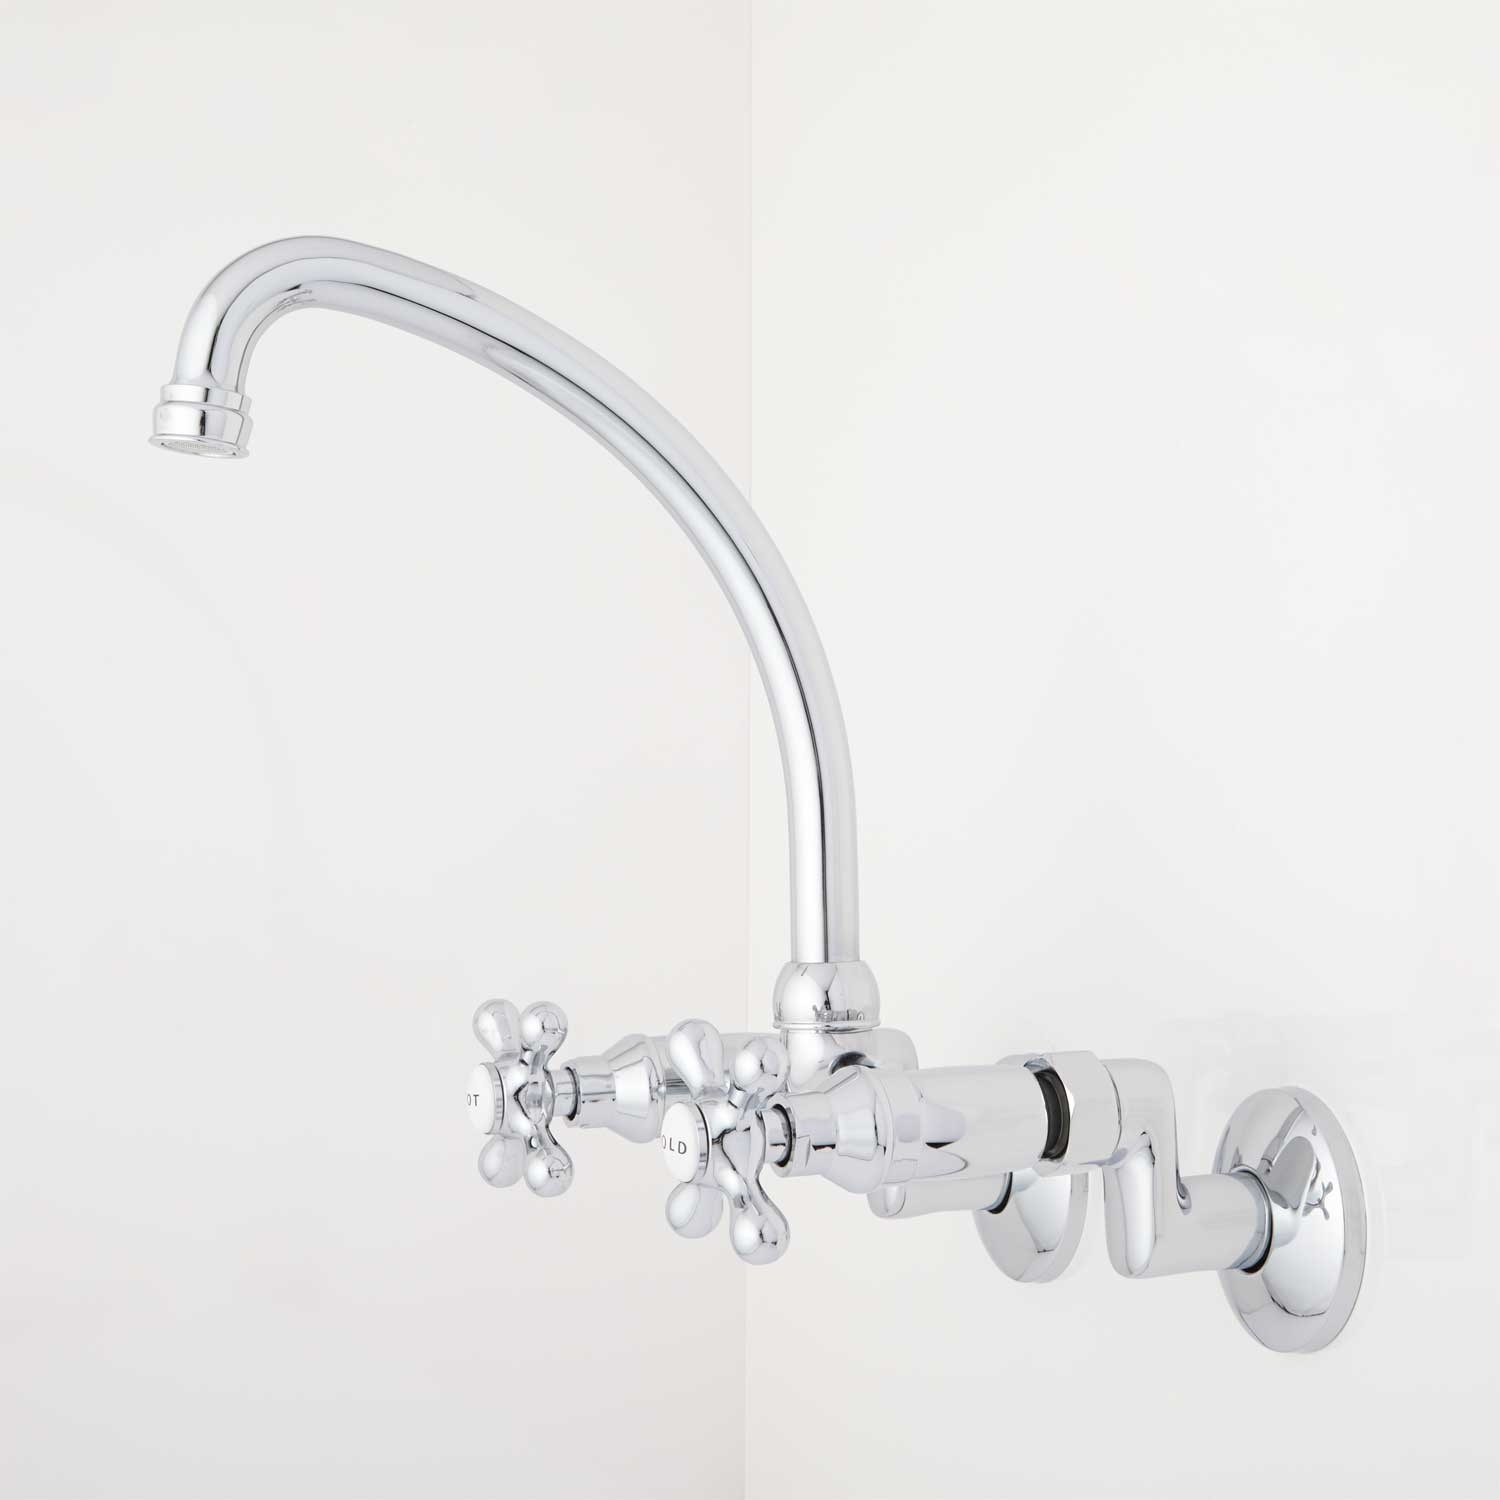 Delta Wall Mounted Kitchen Faucet
 Delta 200 Wall Mount Kitchen Faucet